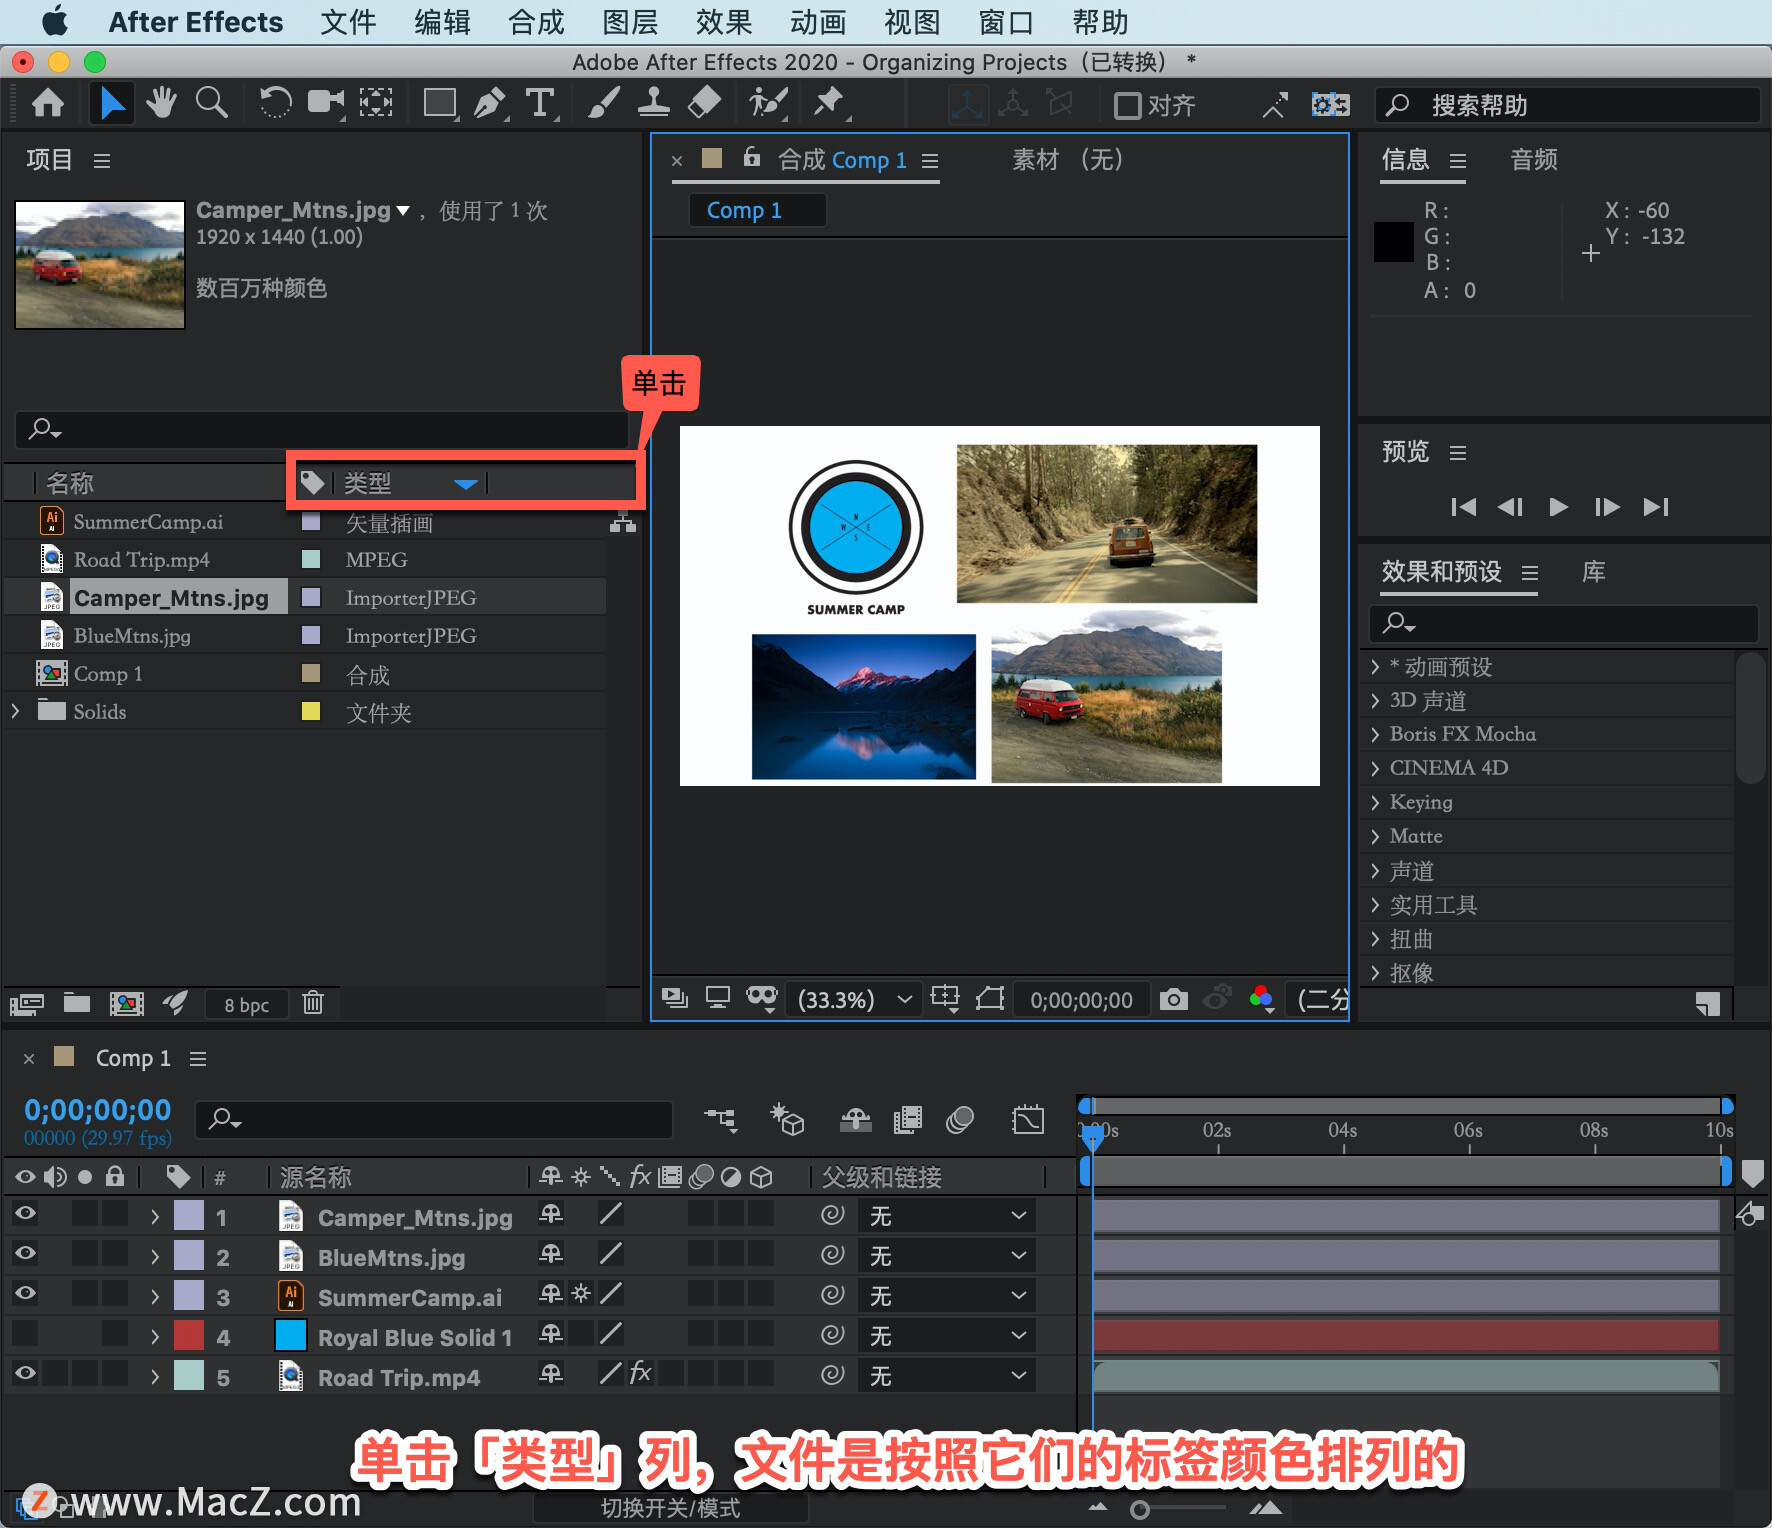 After Effects 教程「4」，如何在 After Effects 中整理项目？